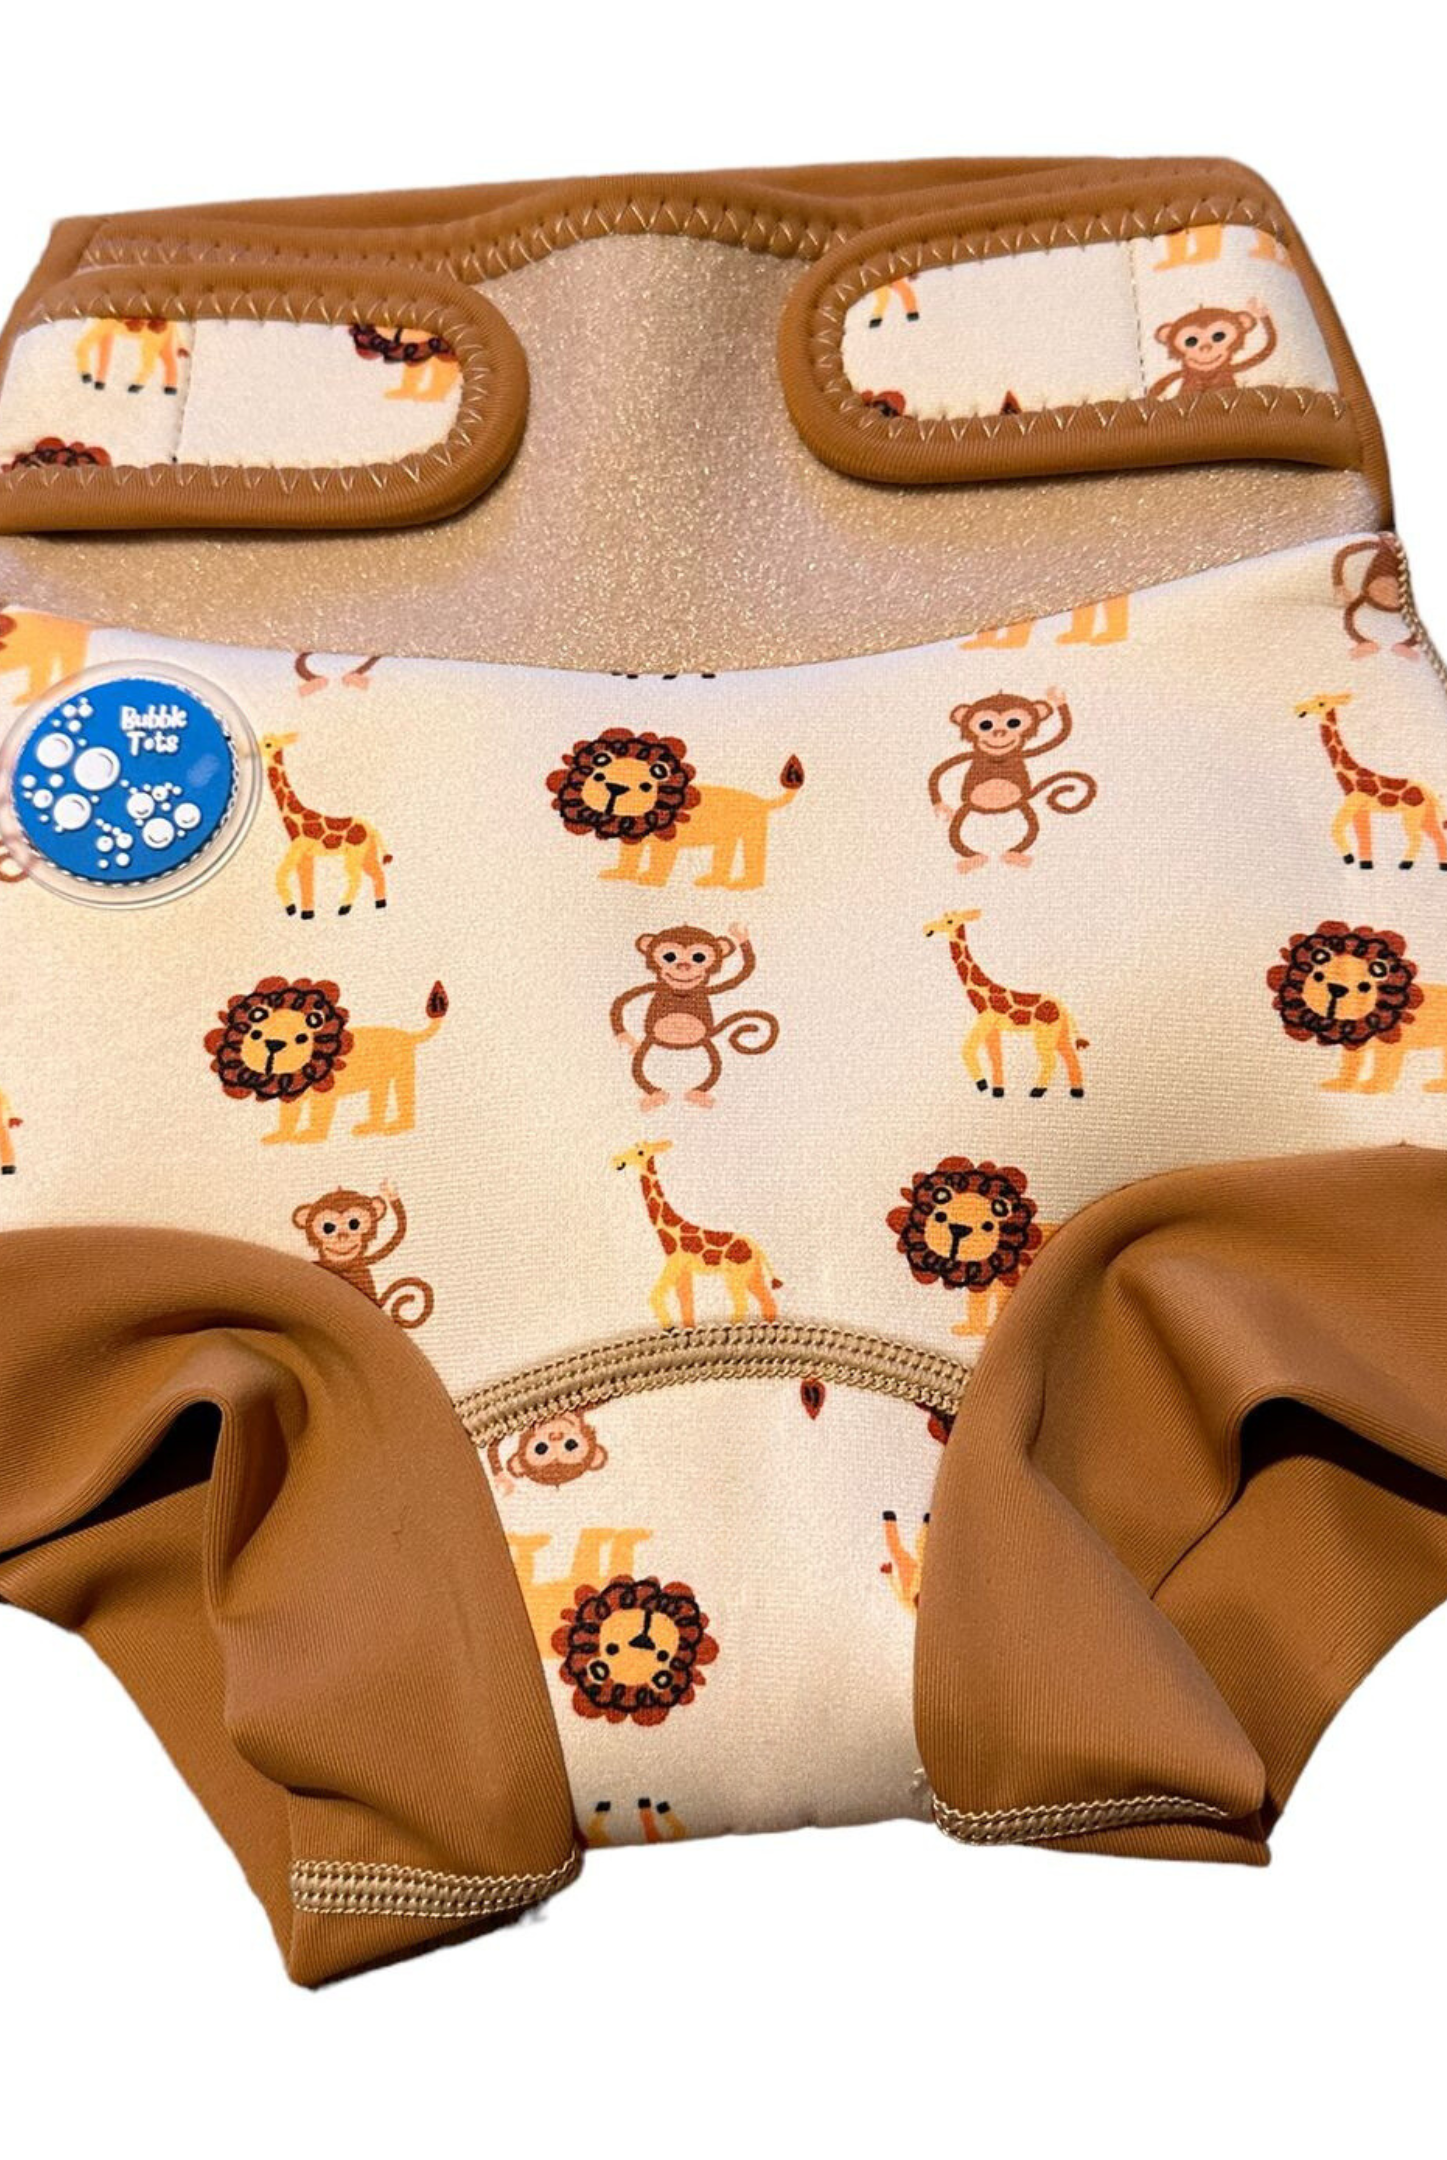 Bubble Tots Go Anywhere Swim Nappy Safari Animals Design An image of the Bubble Tots Go Anywhere Swim Nappy in Yellow Beige Safari Animals design. The design features playful Monkeys, Giraffes and Lions. 